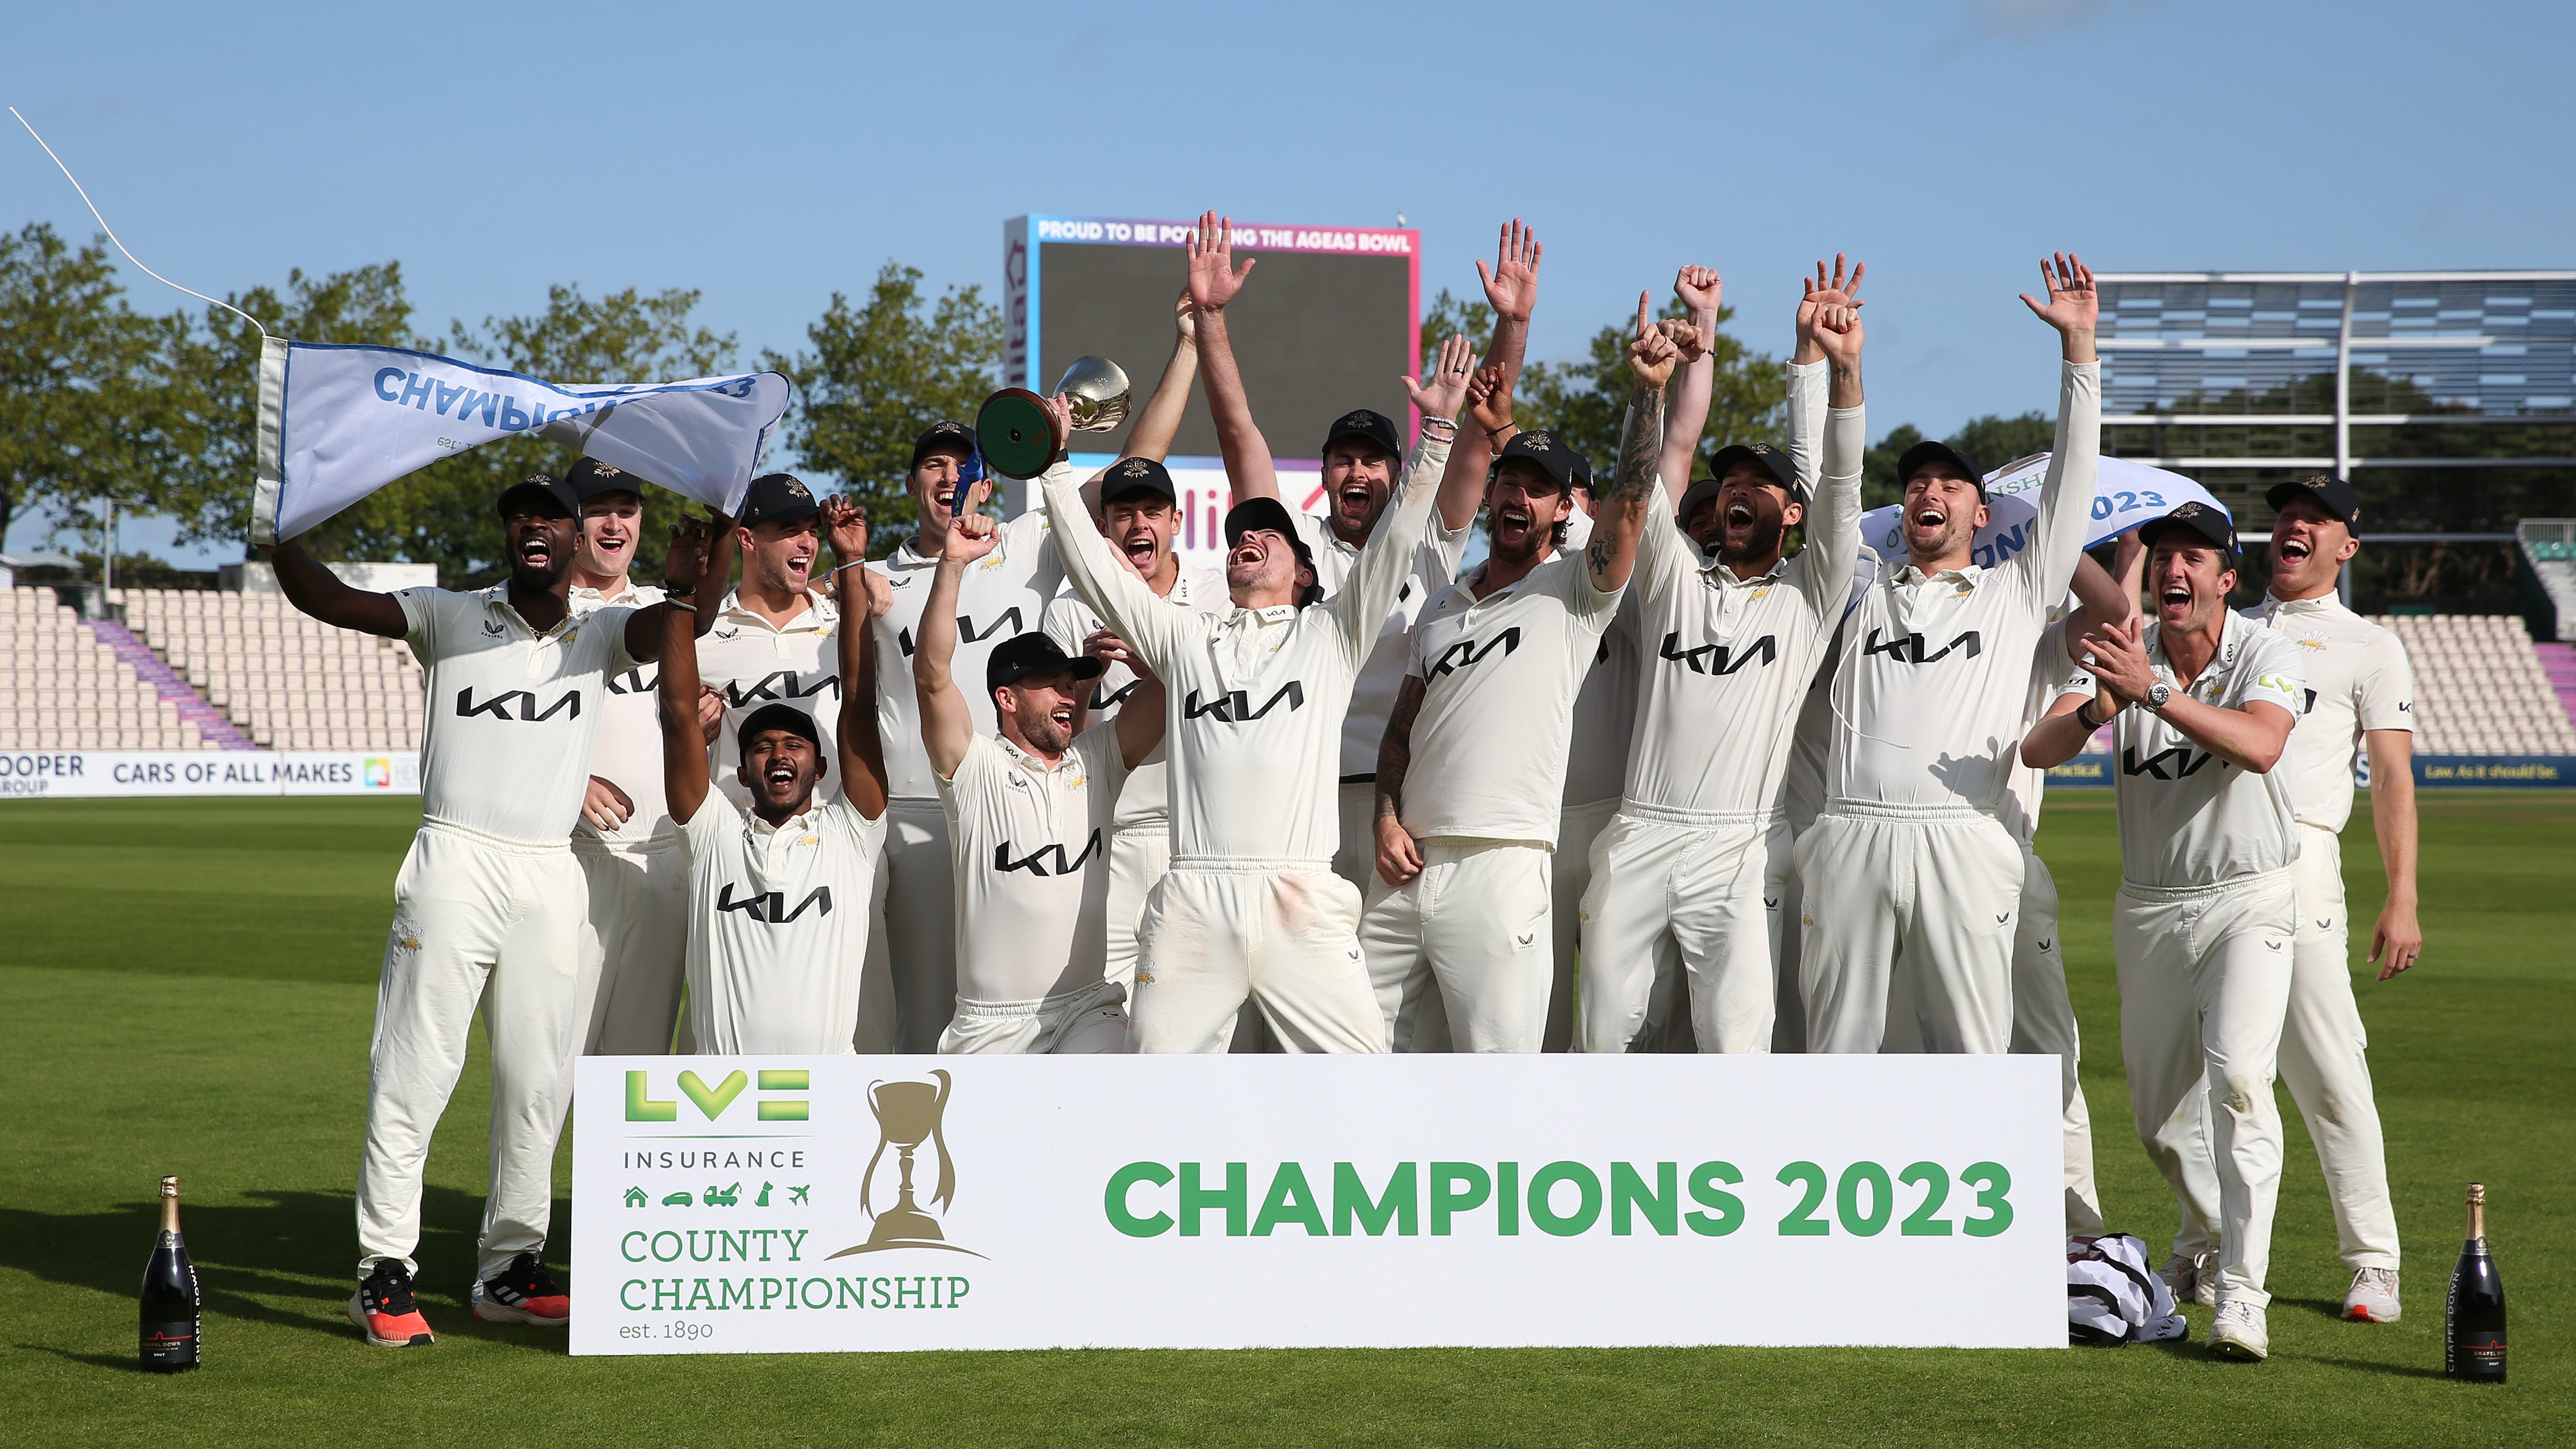 Surrey were the County Championship winners in 2023